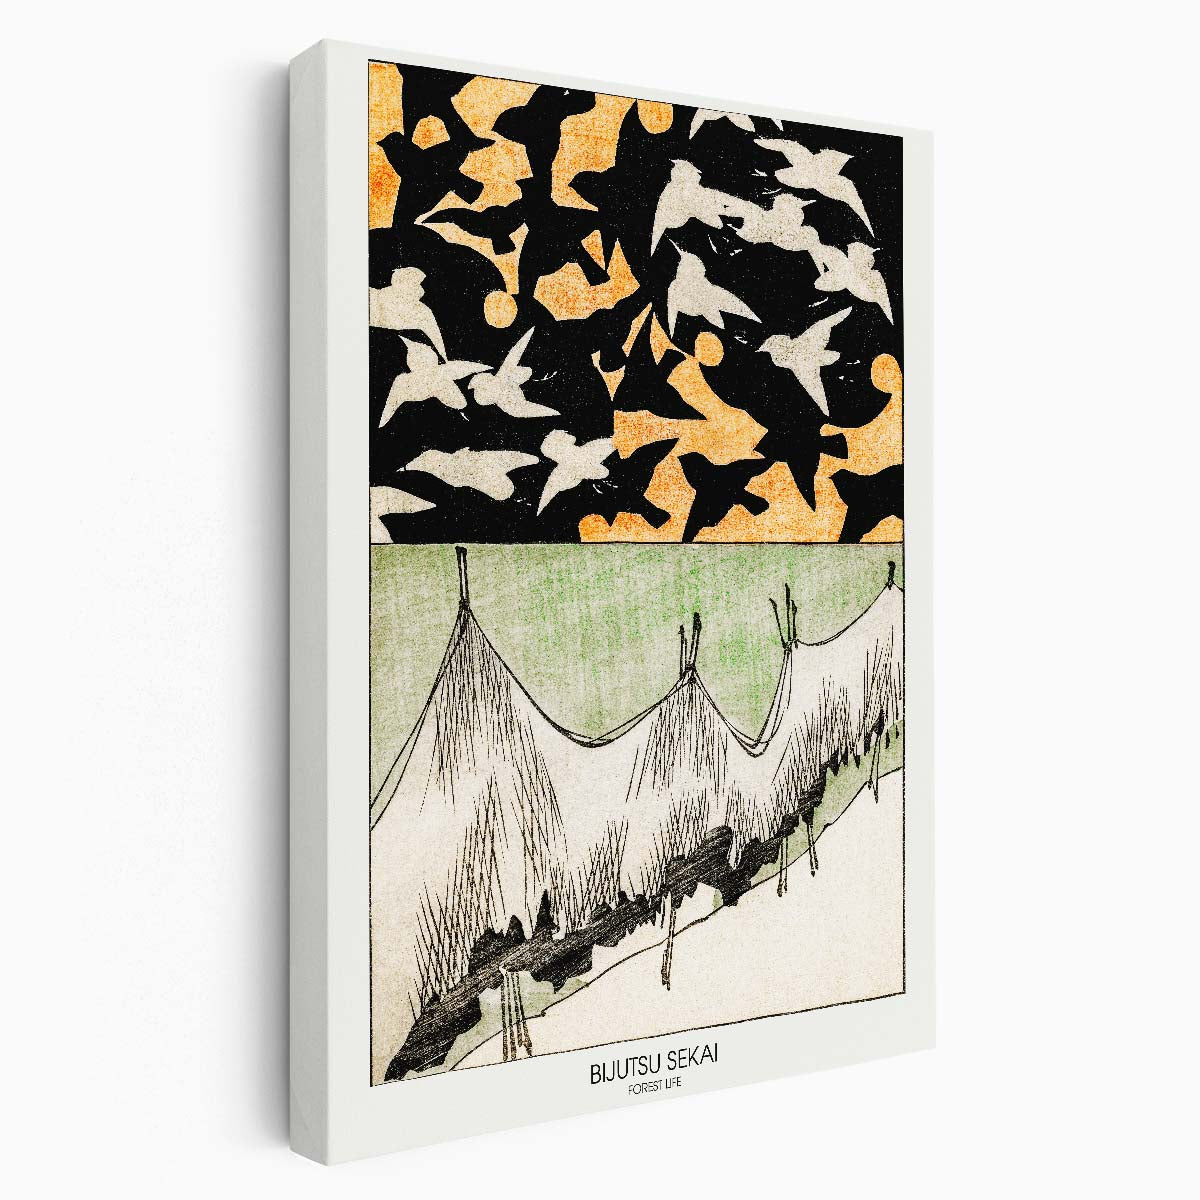 Japanese Master Bijutsu Sekai's Abstract Forest Life Illustration Poster by Luxuriance Designs, made in USA